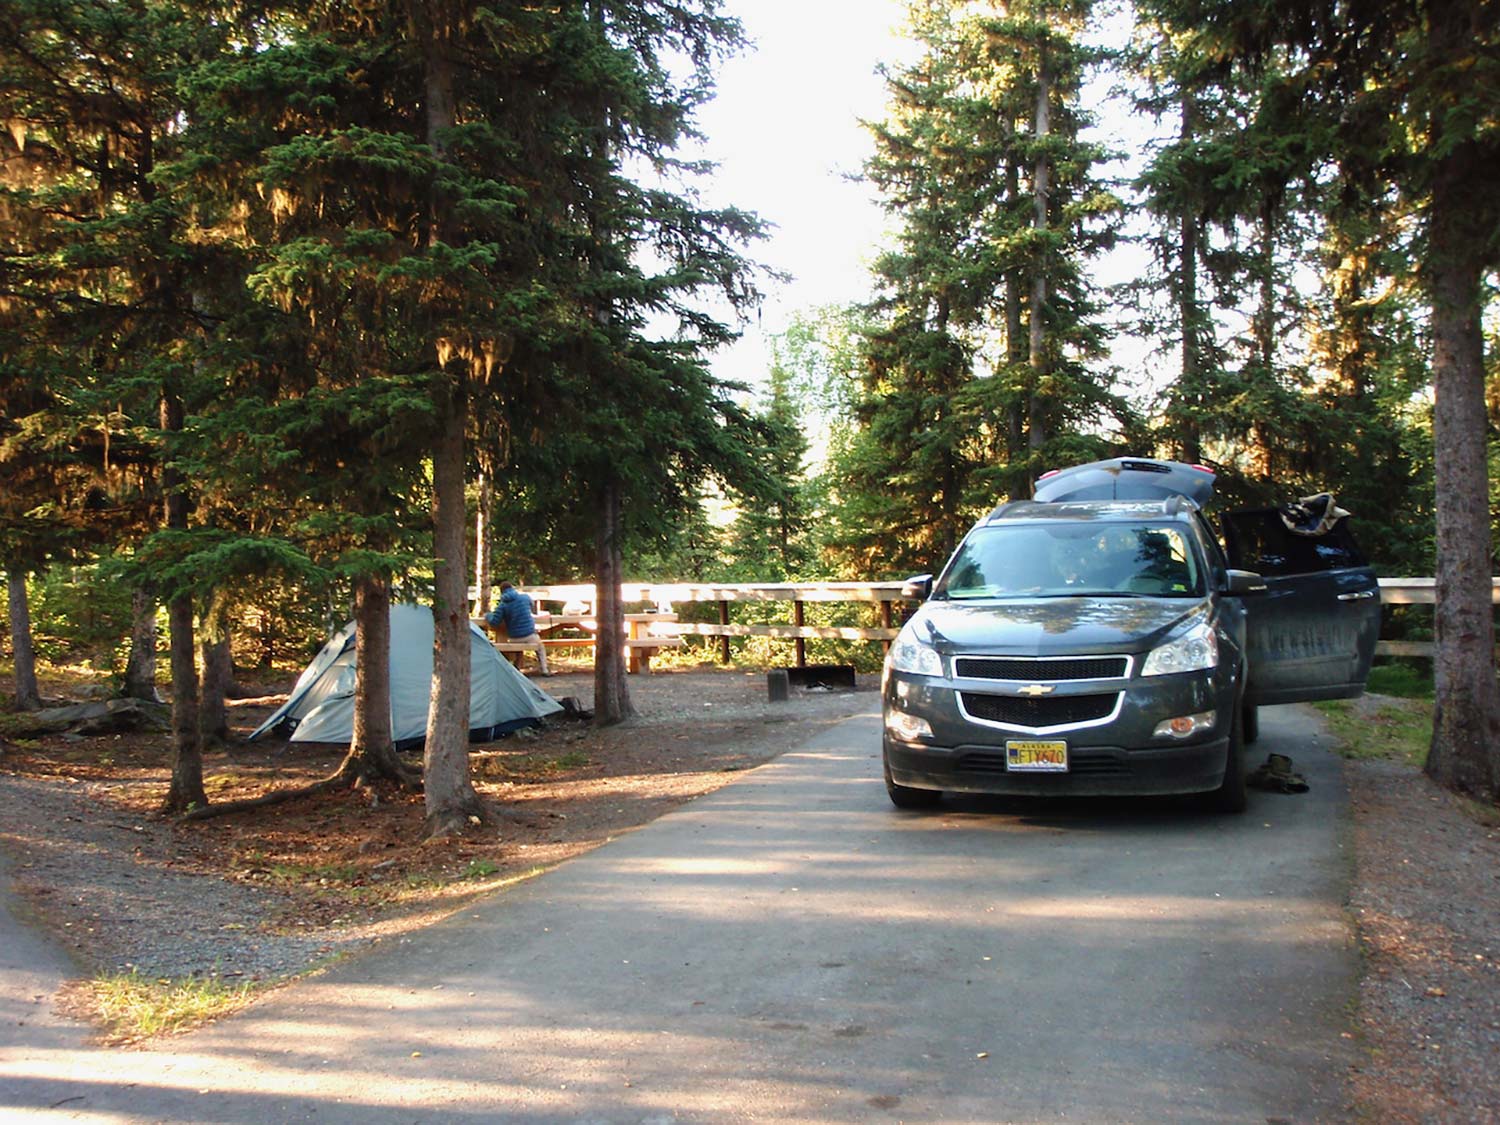 A small hunting campground with a Chevrolet vehicle parked nearby.